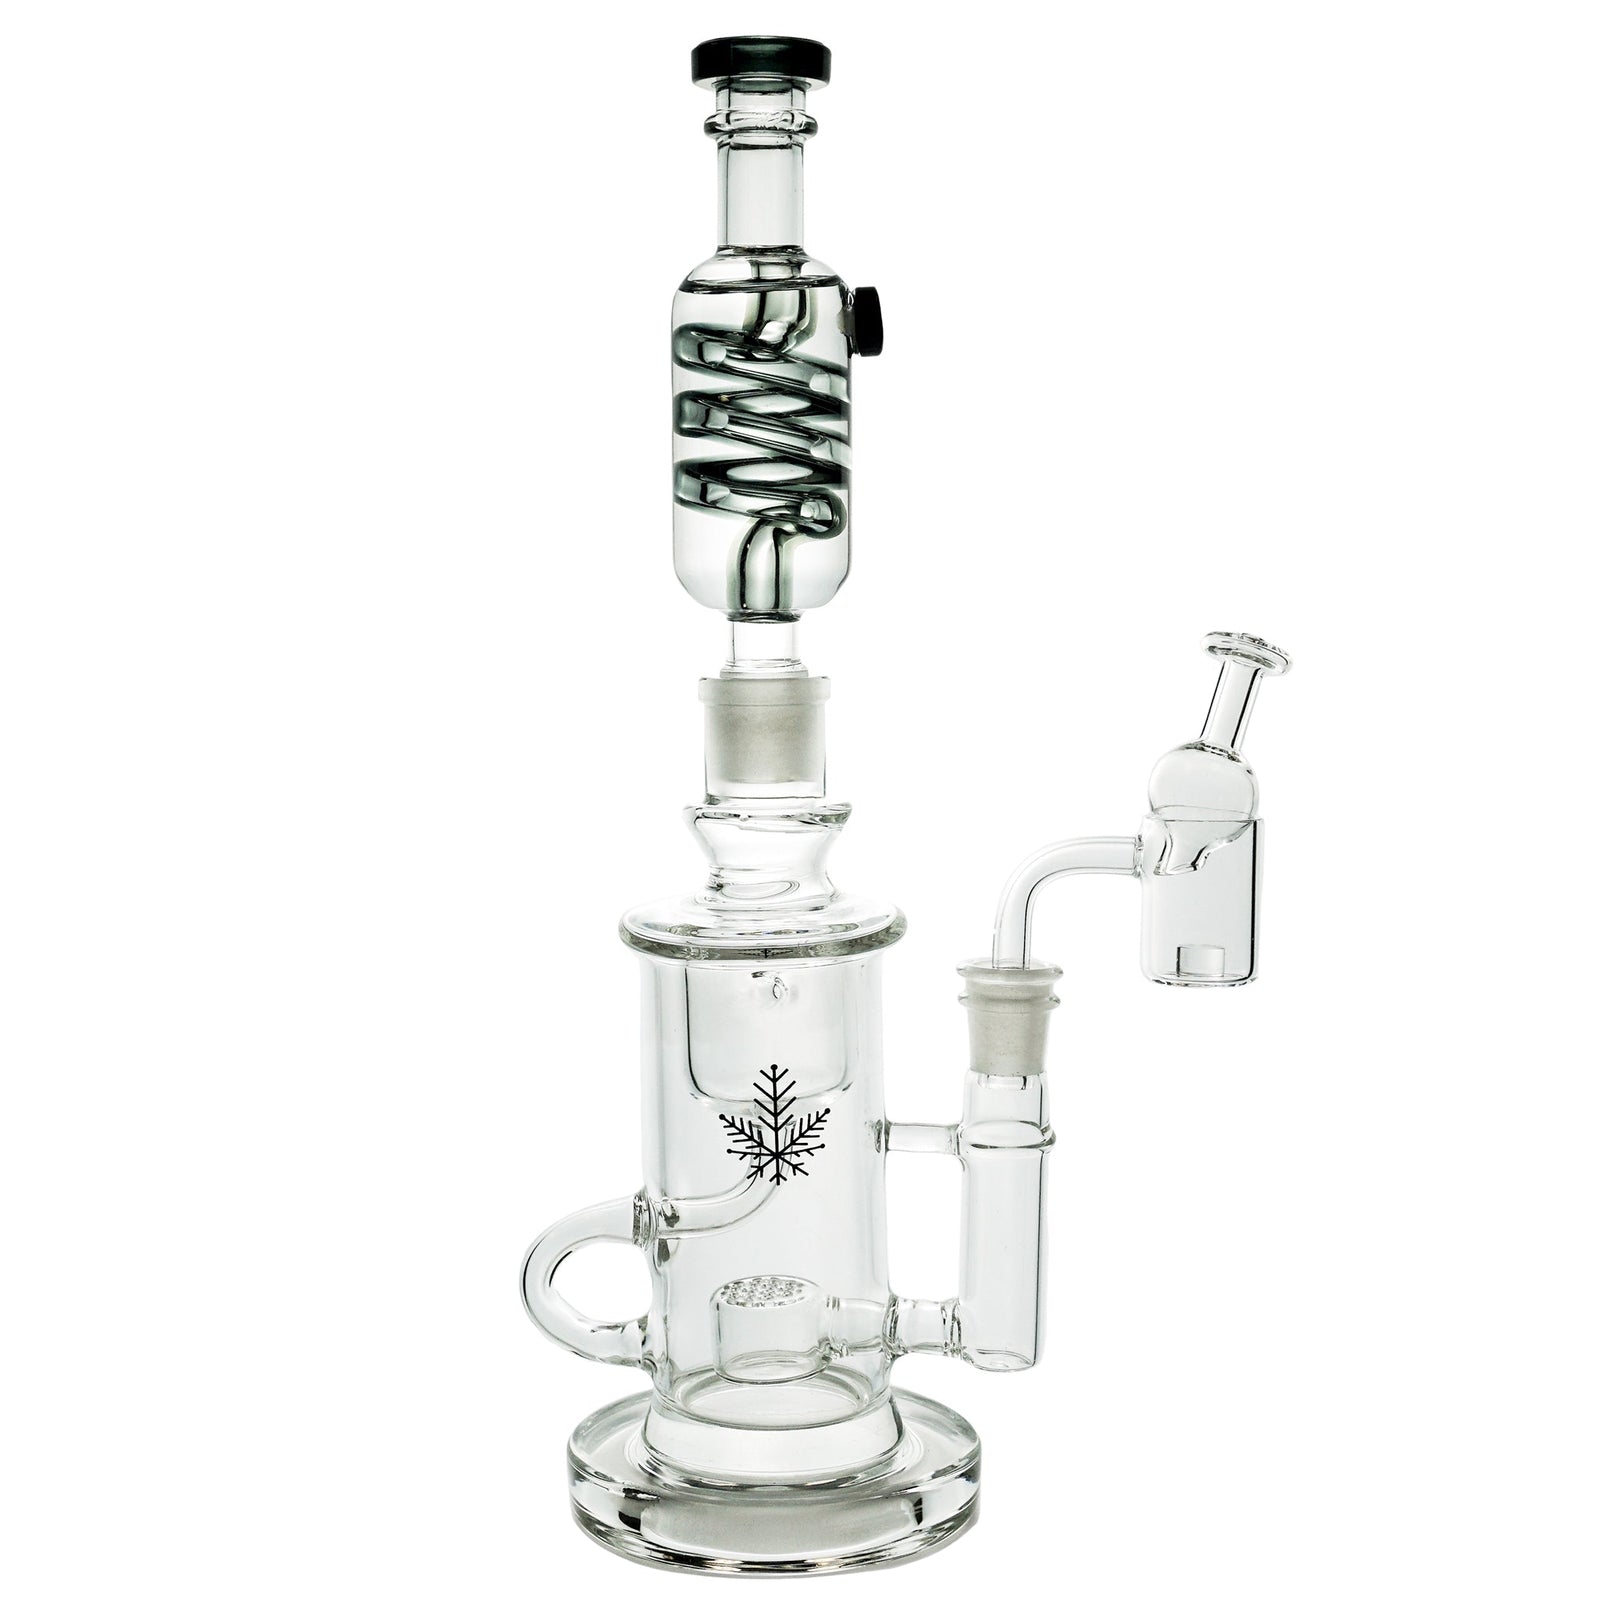 Buy Wholesale China Electric Tree Branch Glass Smoking Water Pipe